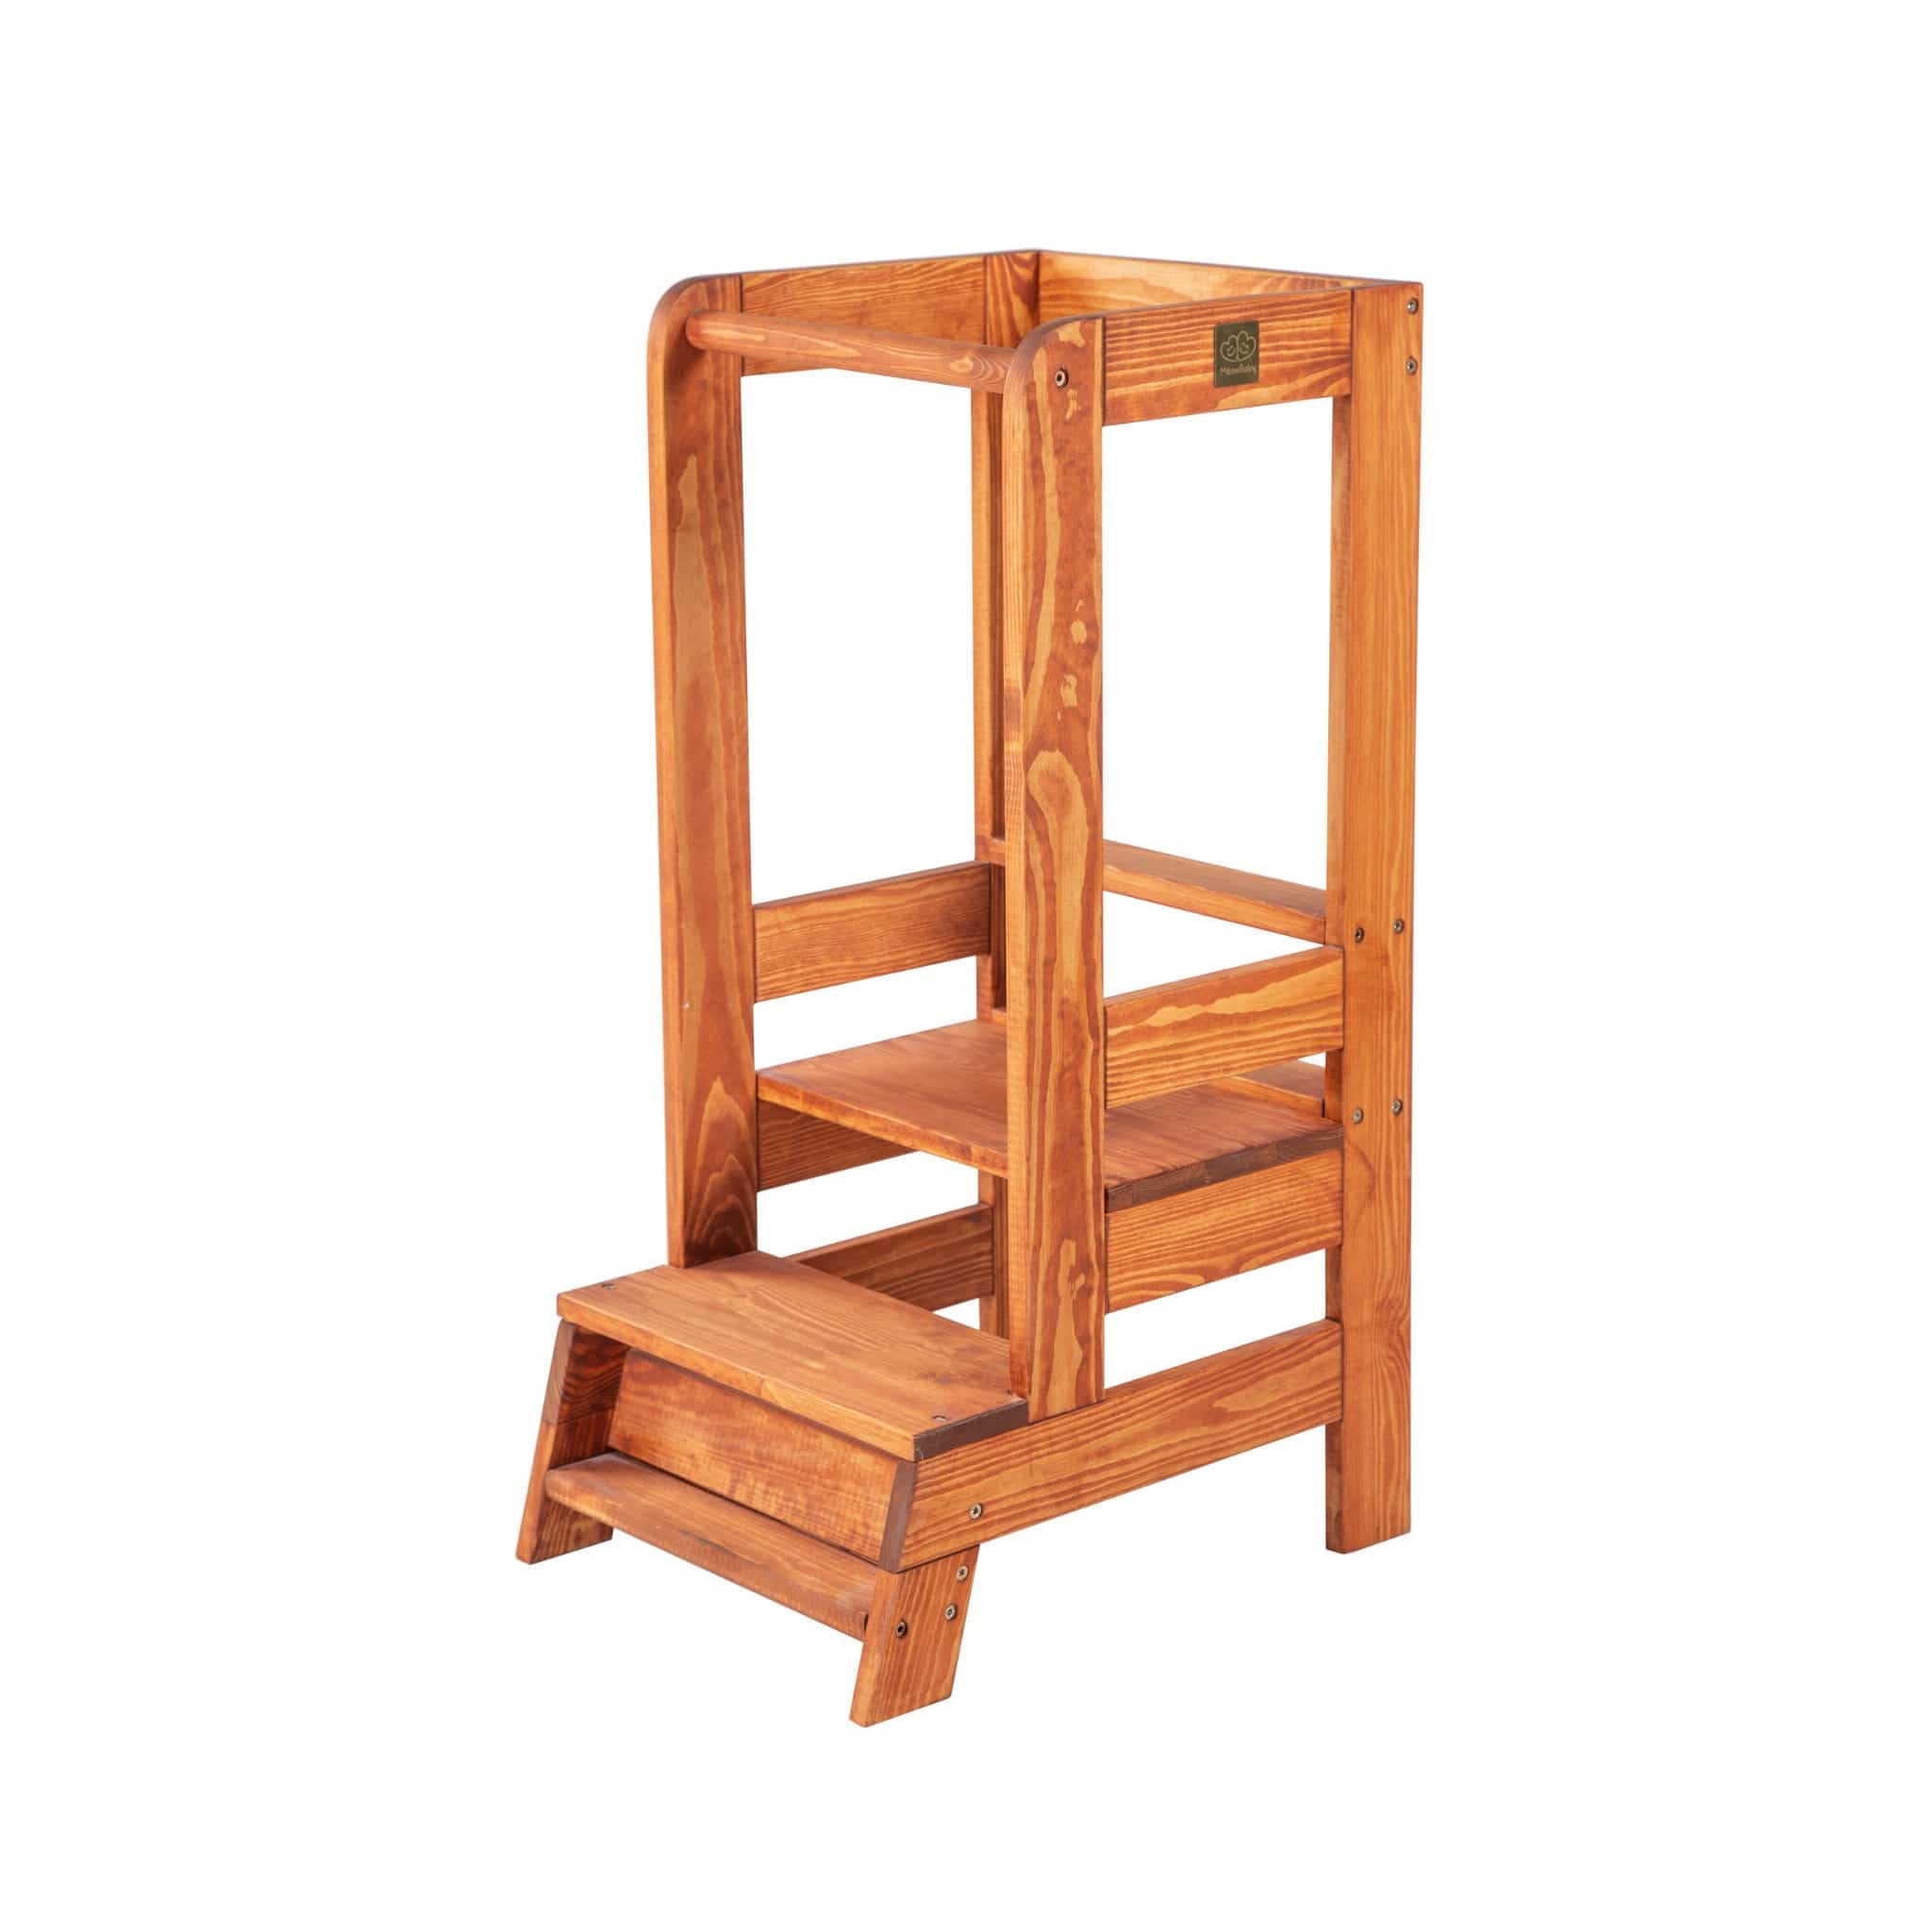 Wooden Kitchen Helper - Learning Tower For Kids By MeowBaby